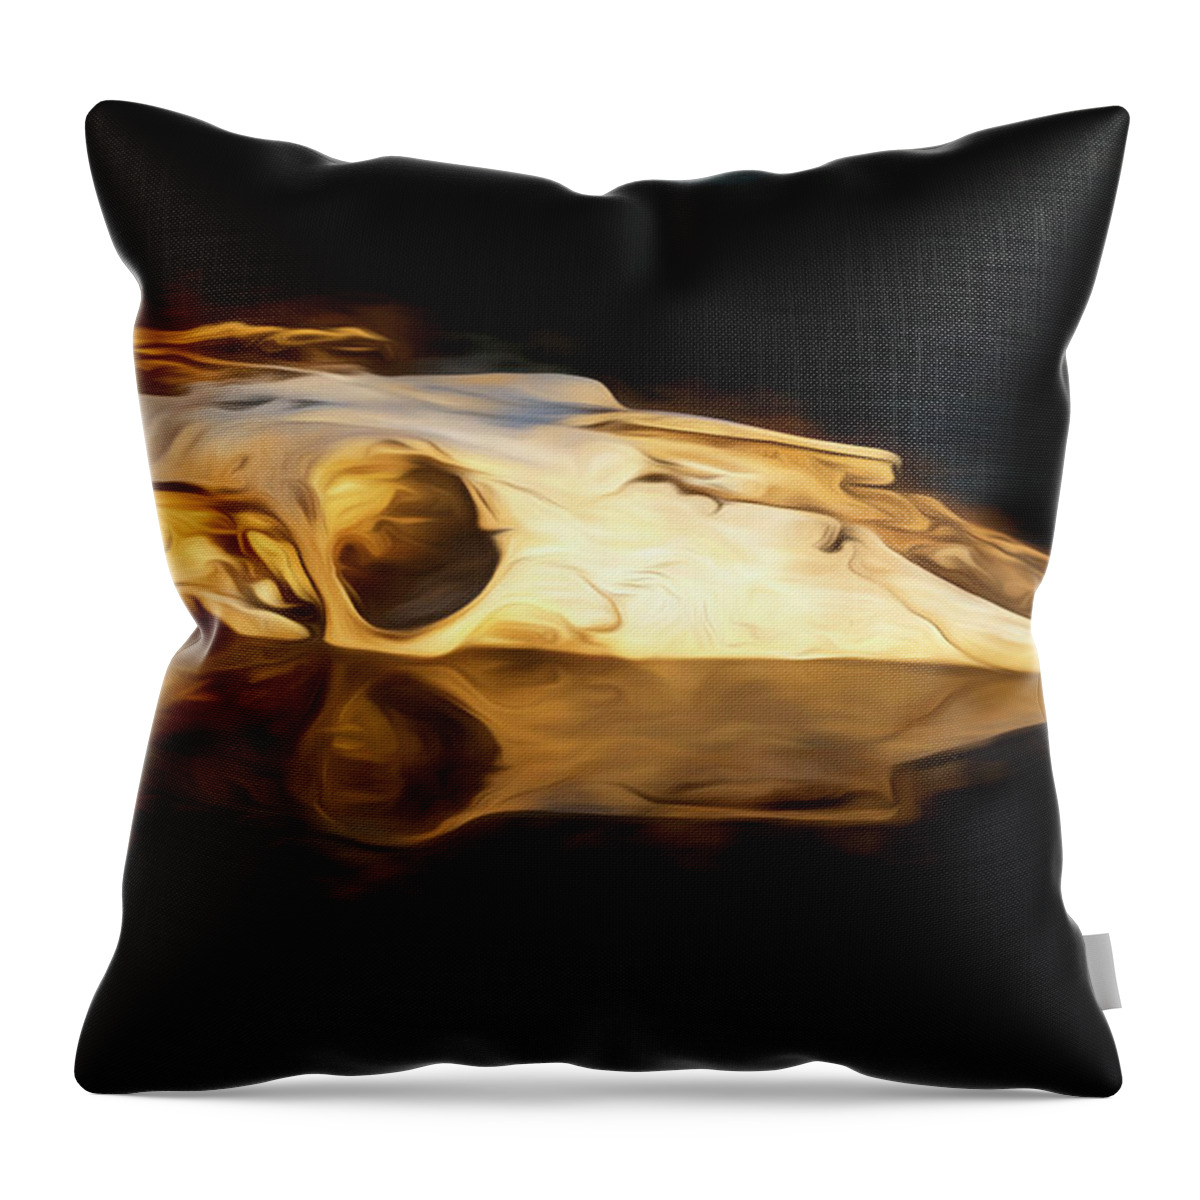 Kansas Throw Pillow featuring the photograph Cow Skull 003 by Rob Graham